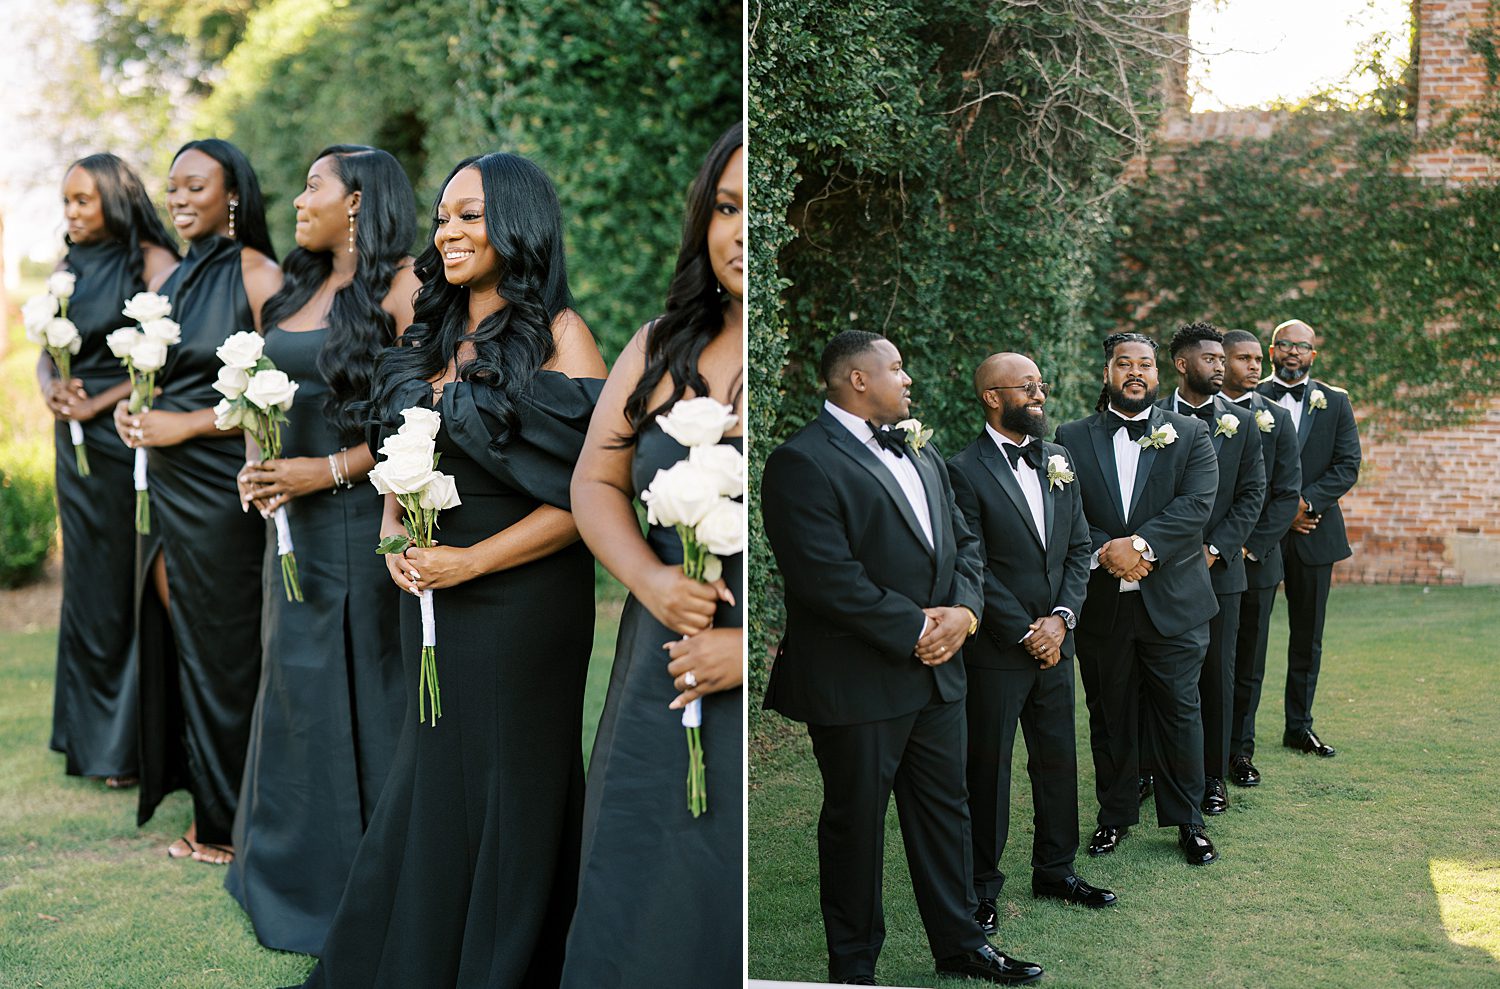 bride poses in mismatched bridal gowns in black and groomsmen stand in tuxes